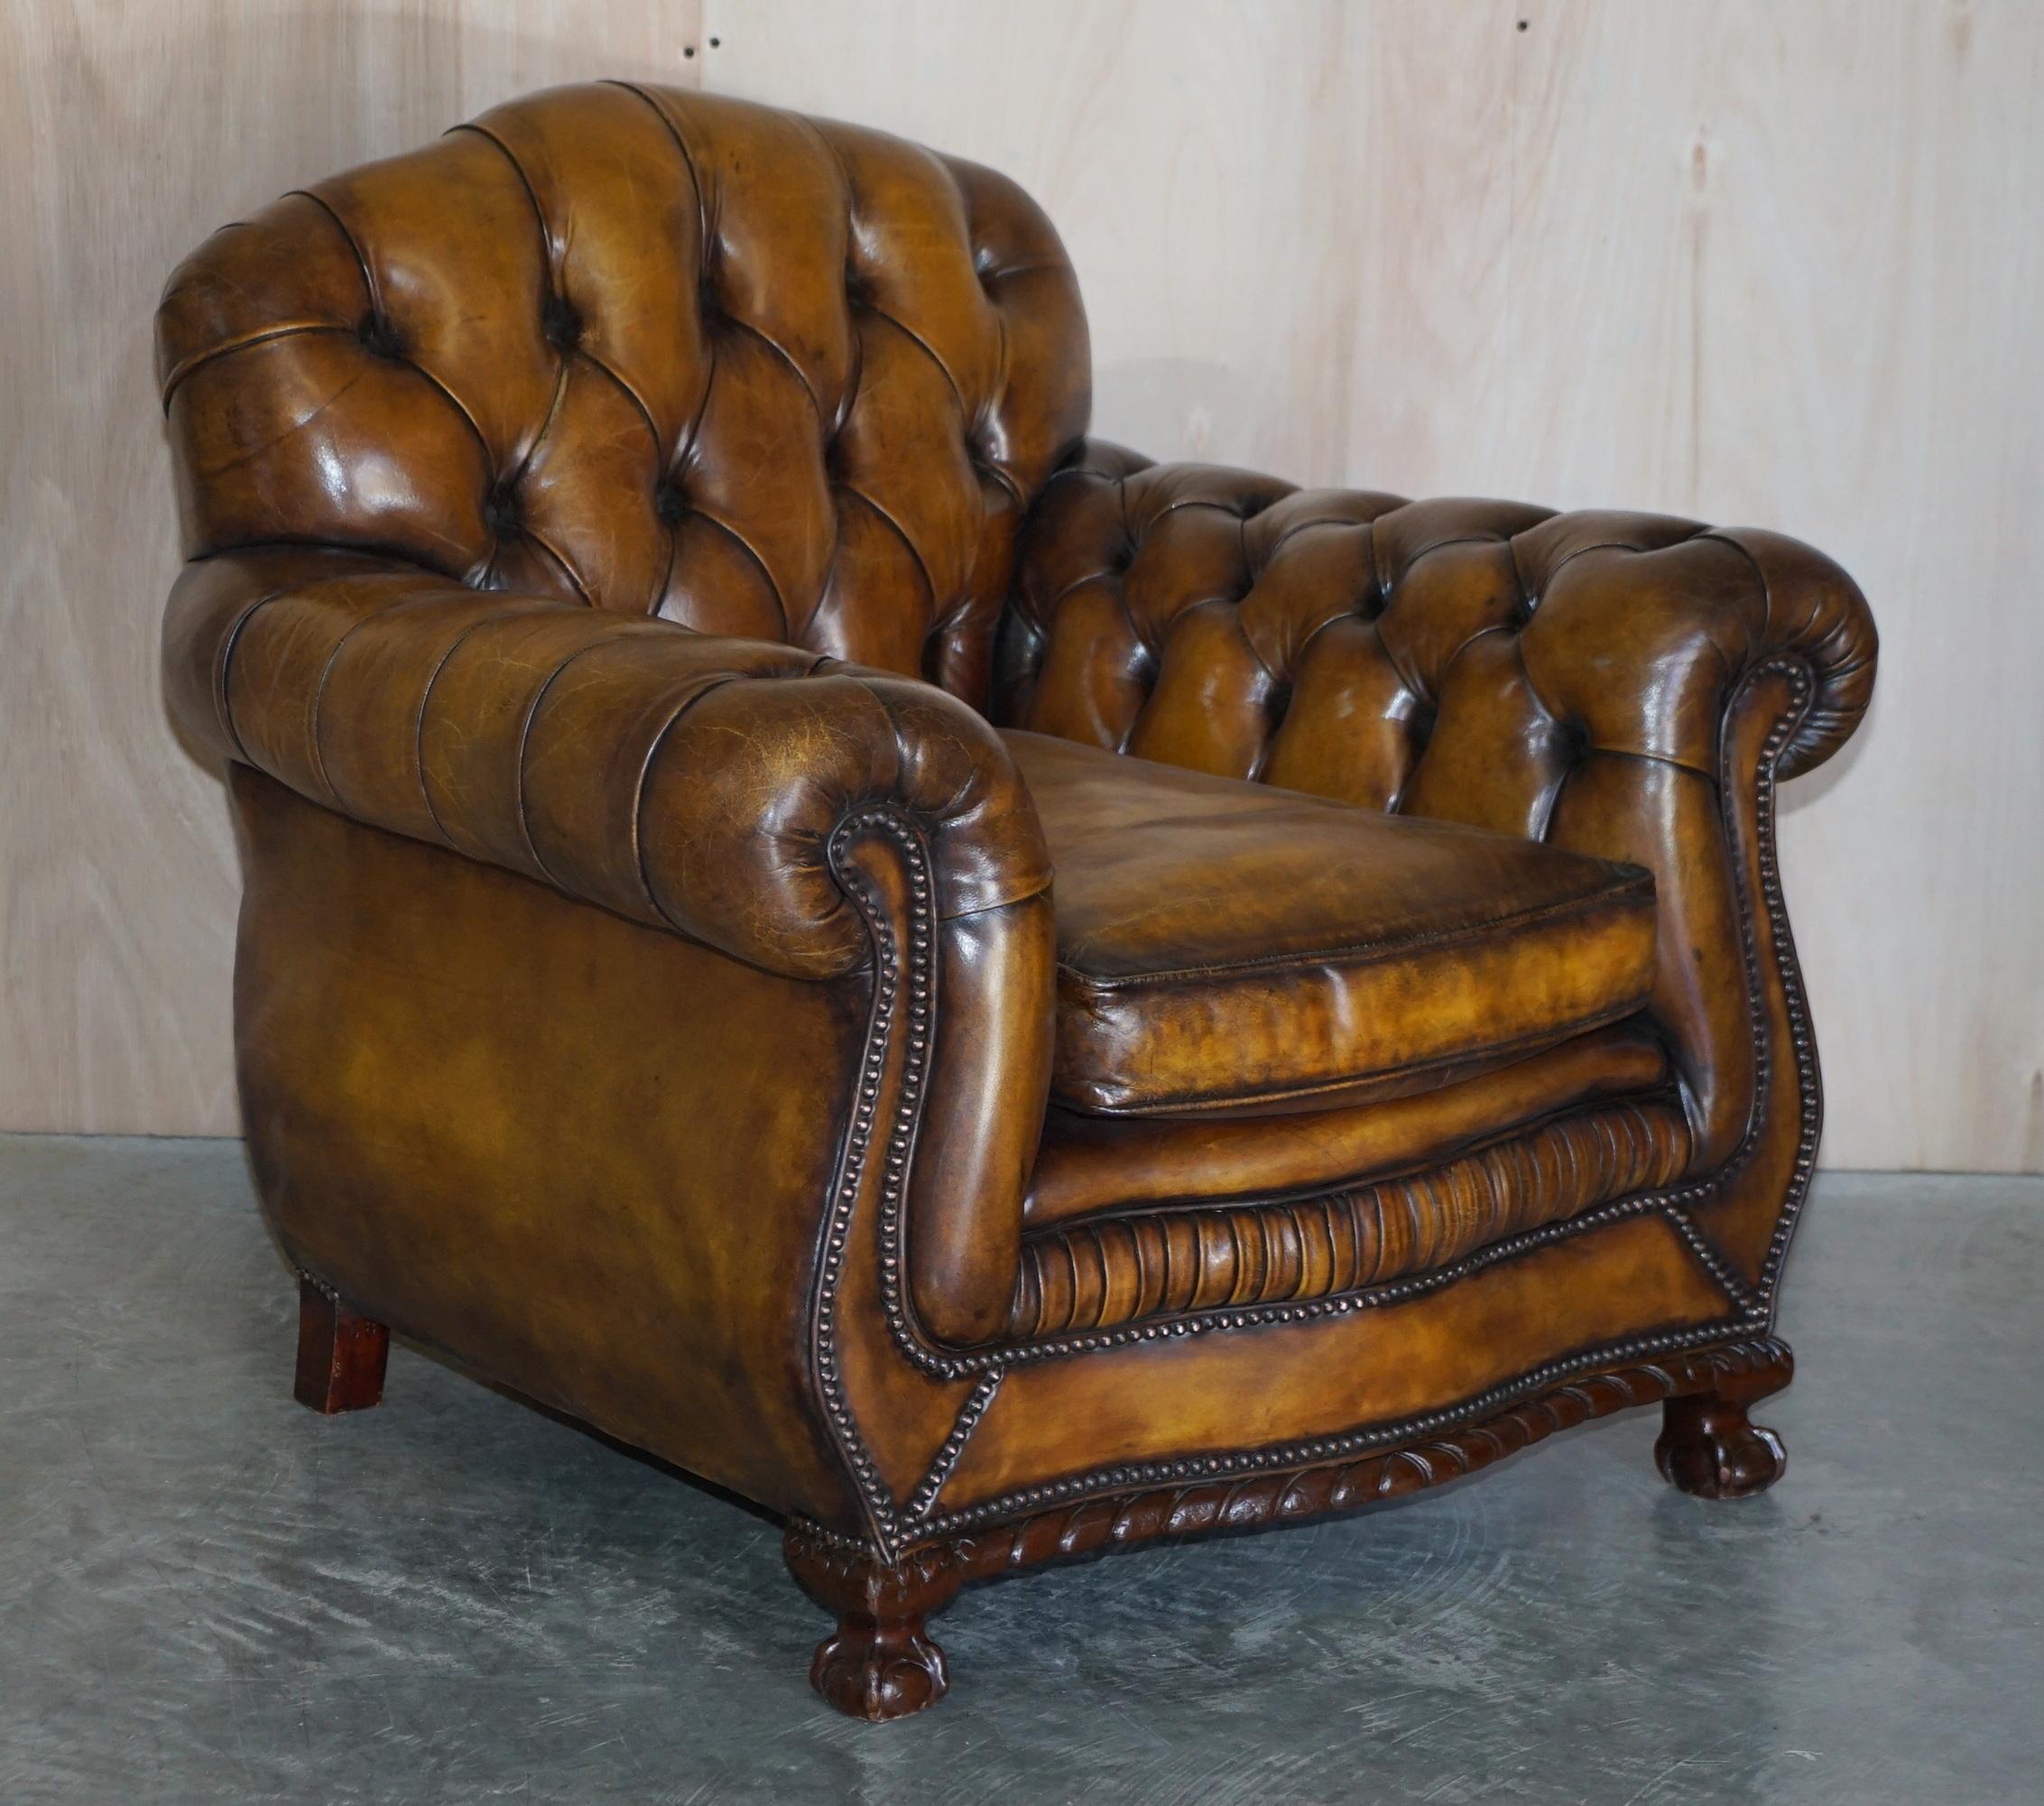 We are delighted to offer for sale this lovely pair of fully restored, Thomas Chippendale style, Victorian hand dyed brown leather Chesterfield buttoned club armchairs with Claw & Ball feet.

A very good looking well-made and decorative pair of